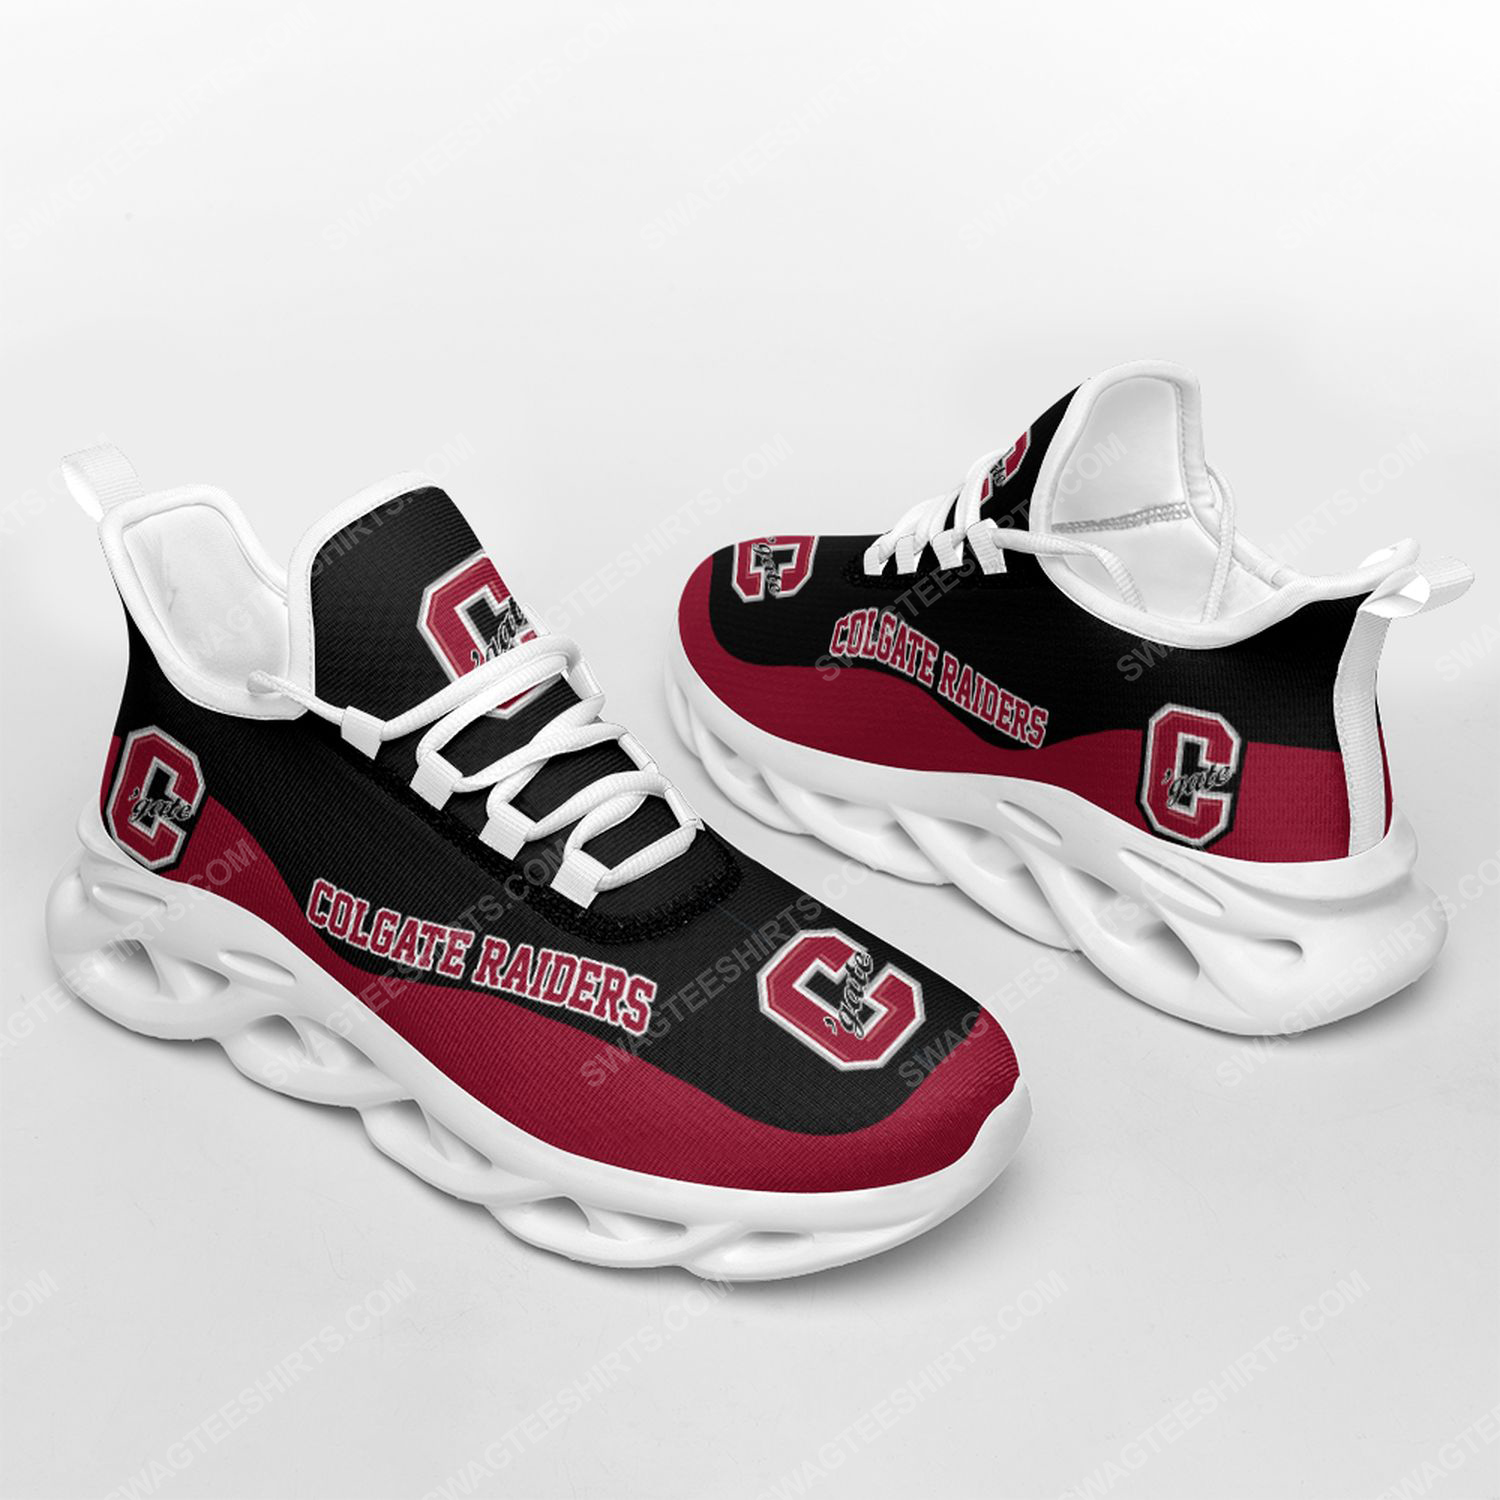 [special edition] The colgate raiders football team max soul shoes – Maria